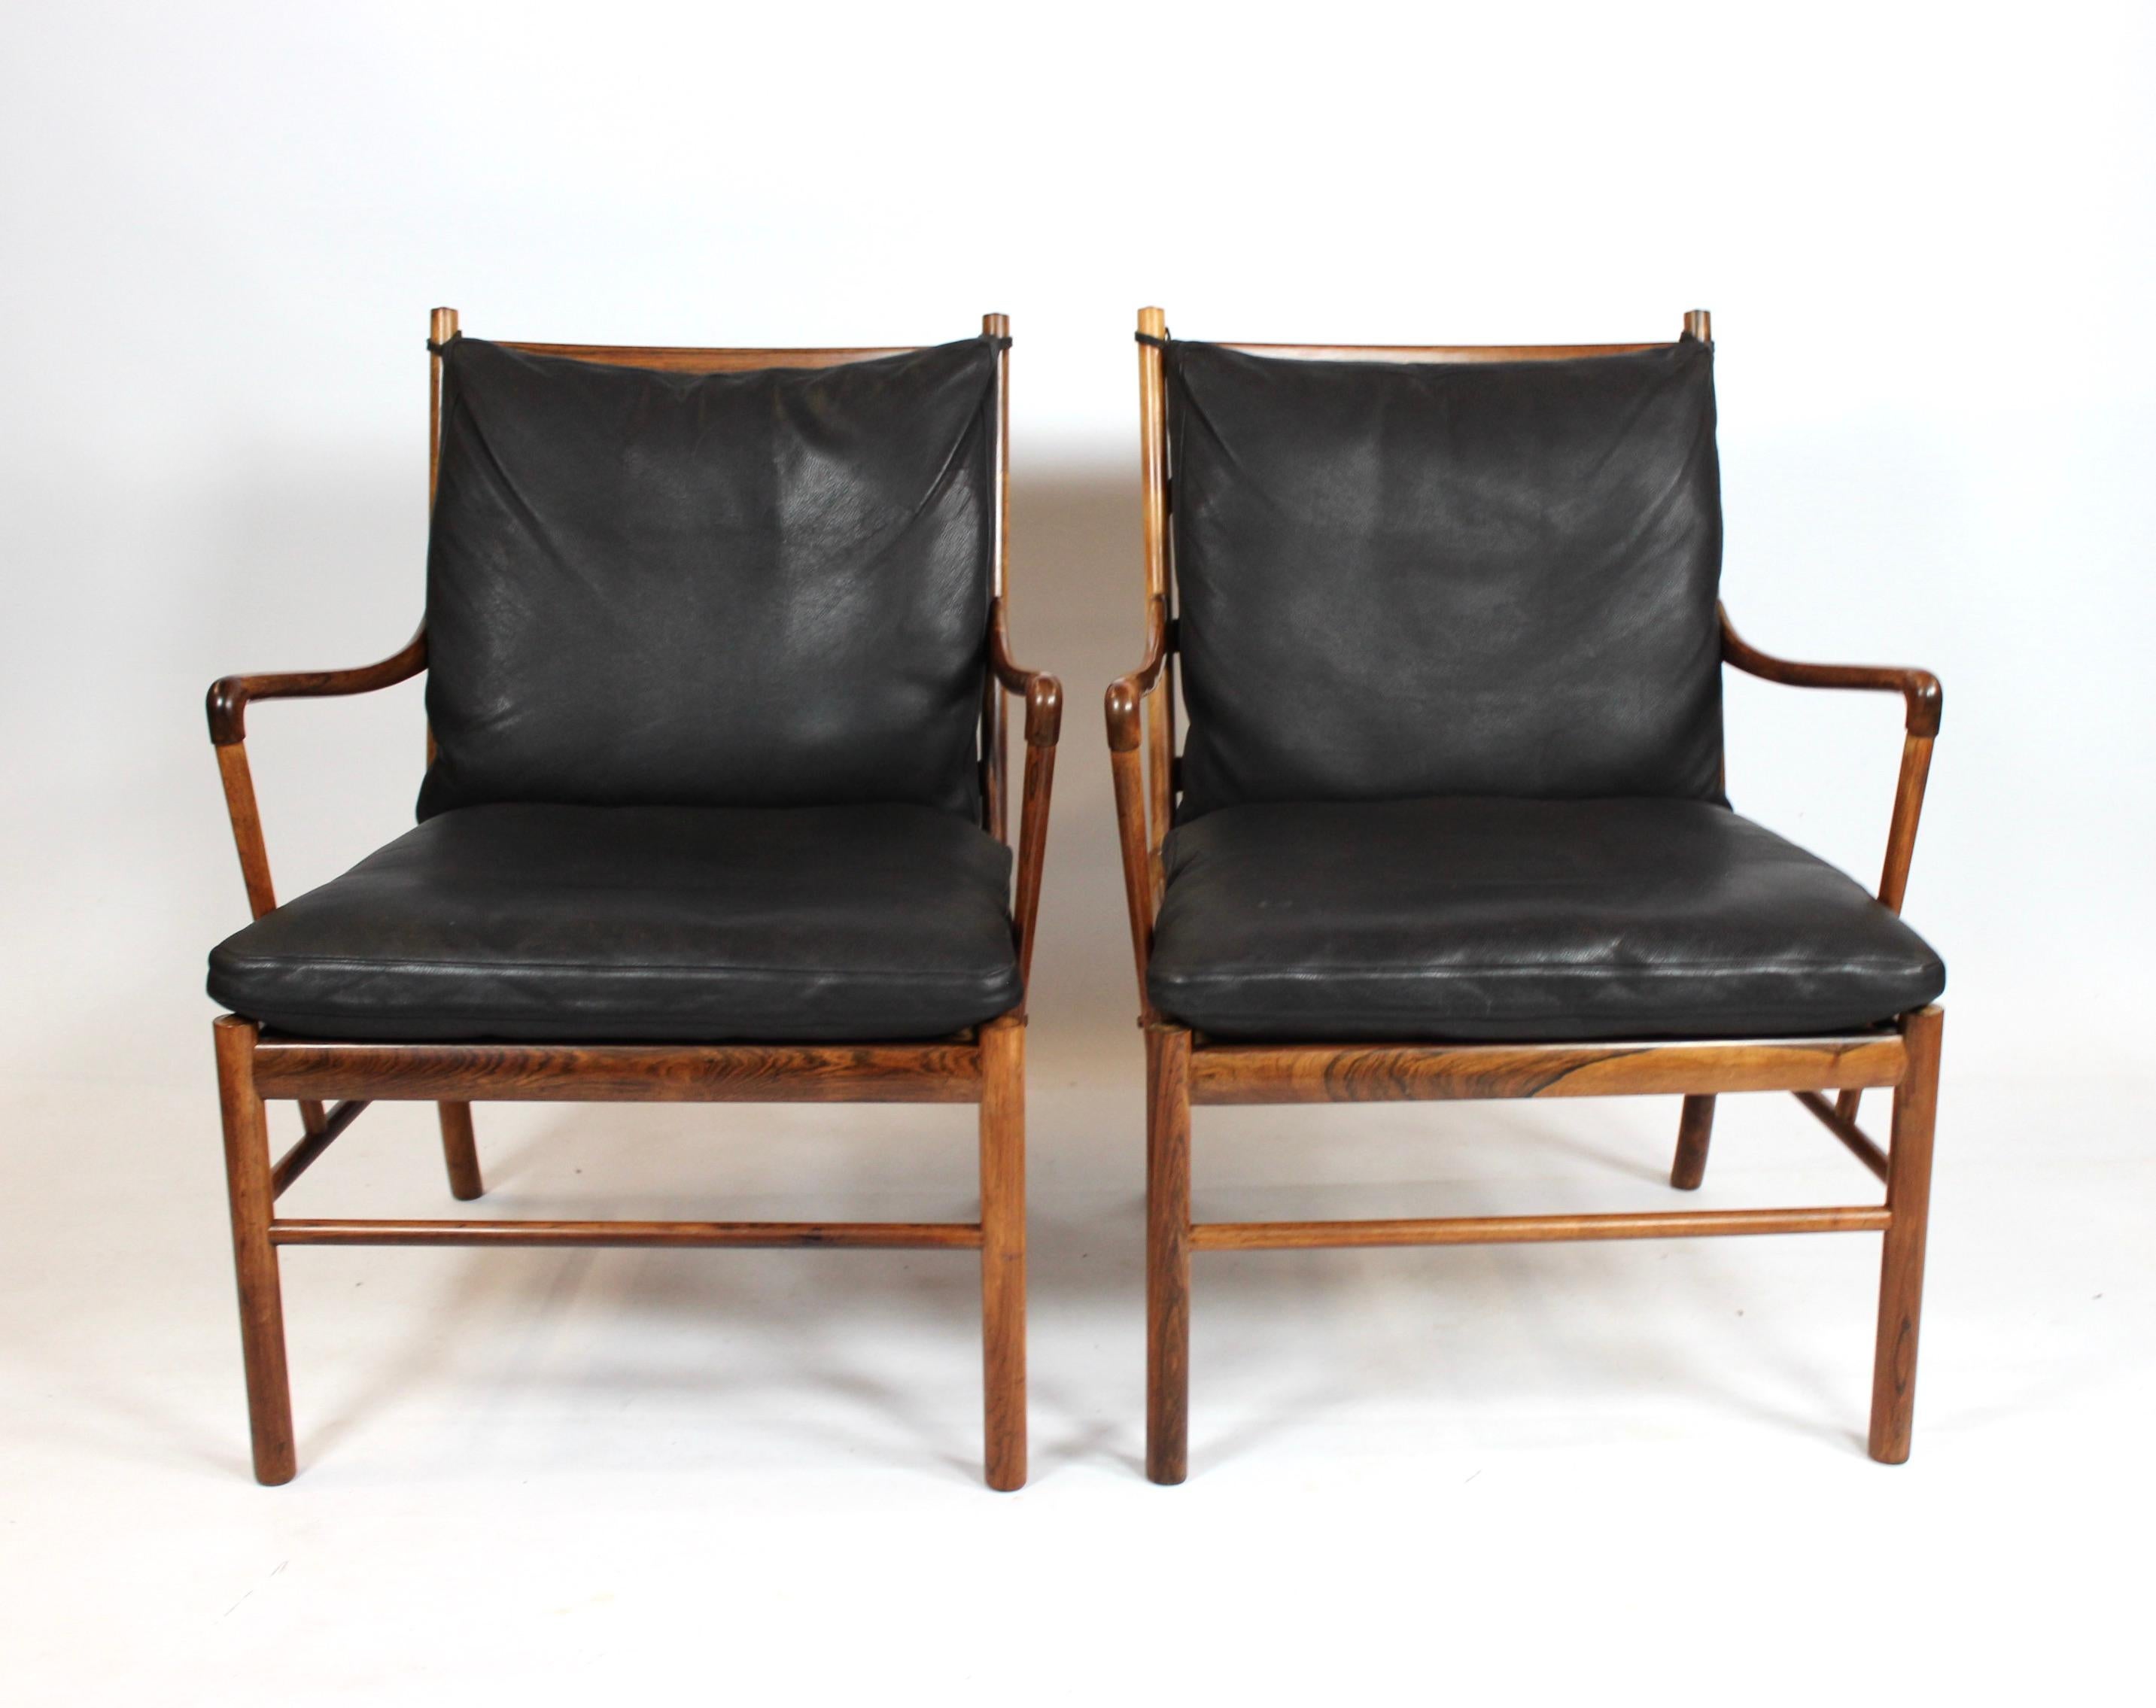 A pair of colonial easy chairs, model PJ149, designed by Ole Wanscher in 1949 and manufactured by P. Jeppesen. The chairs are of rosewood with cushions of black leather and both are in great vintage condition.